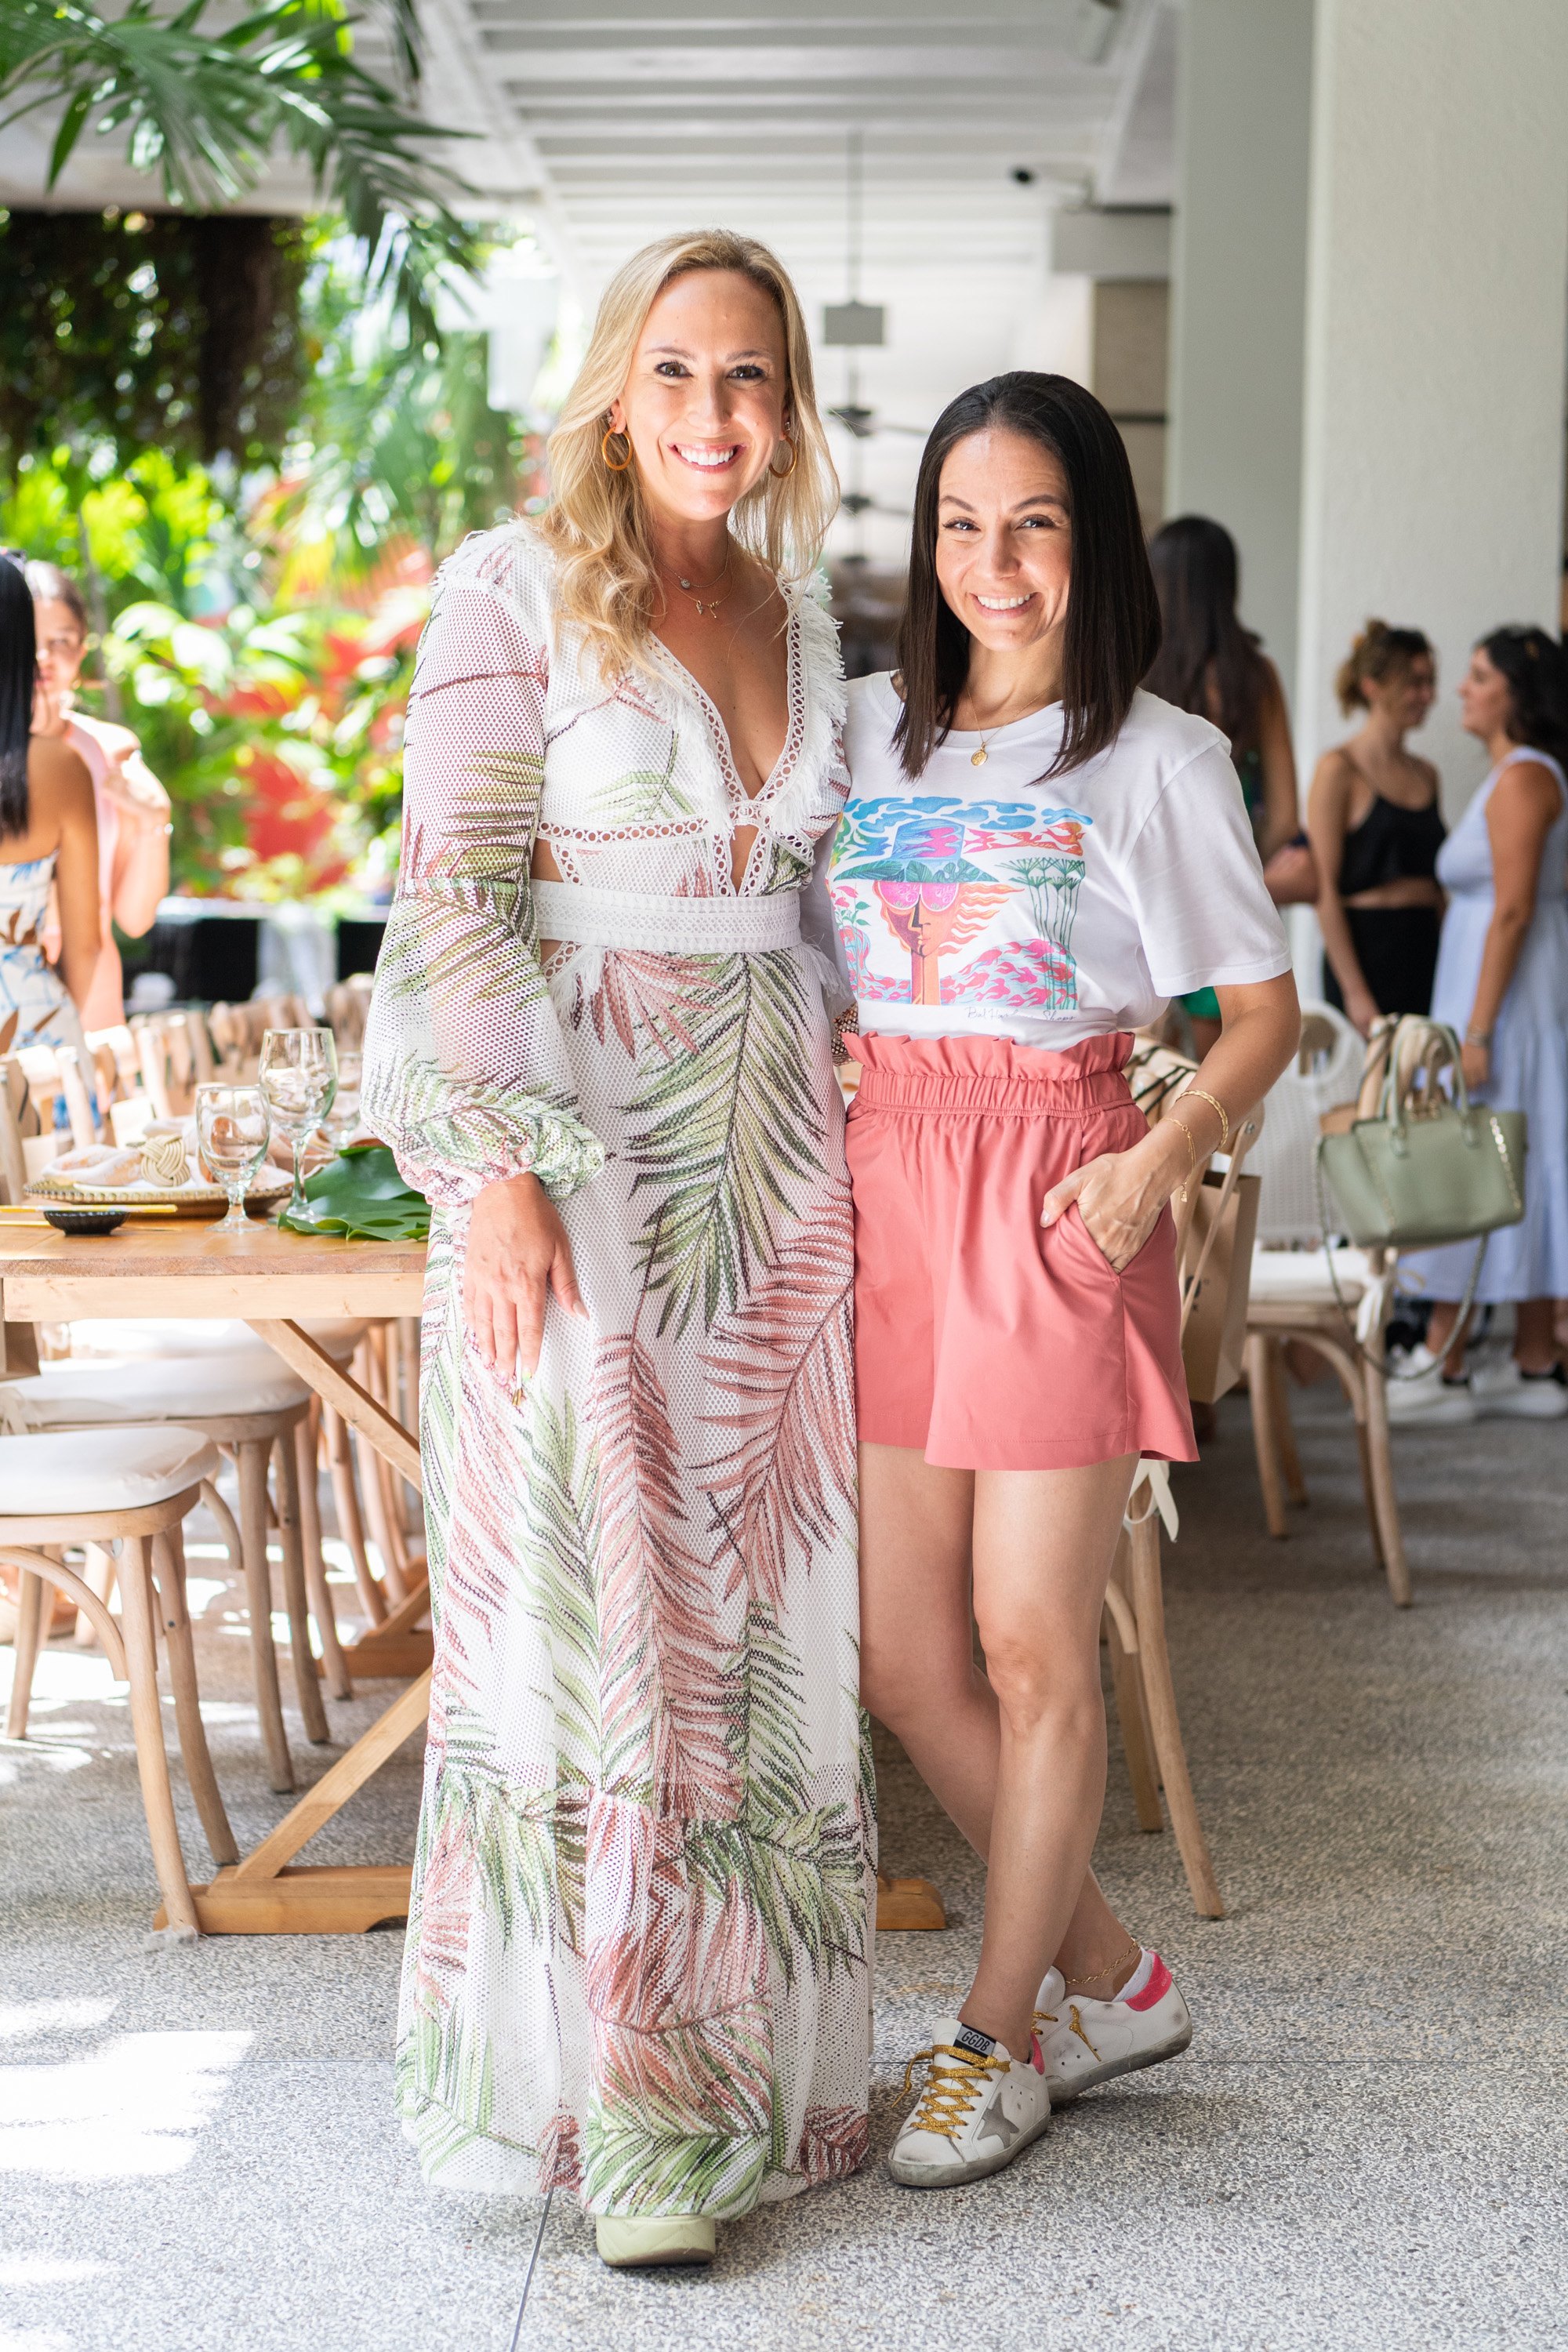 A variety of images showcasing “A Taste of Bal Harbour Shops”. Images include guests in attendance, table décor, and food featured at the event.